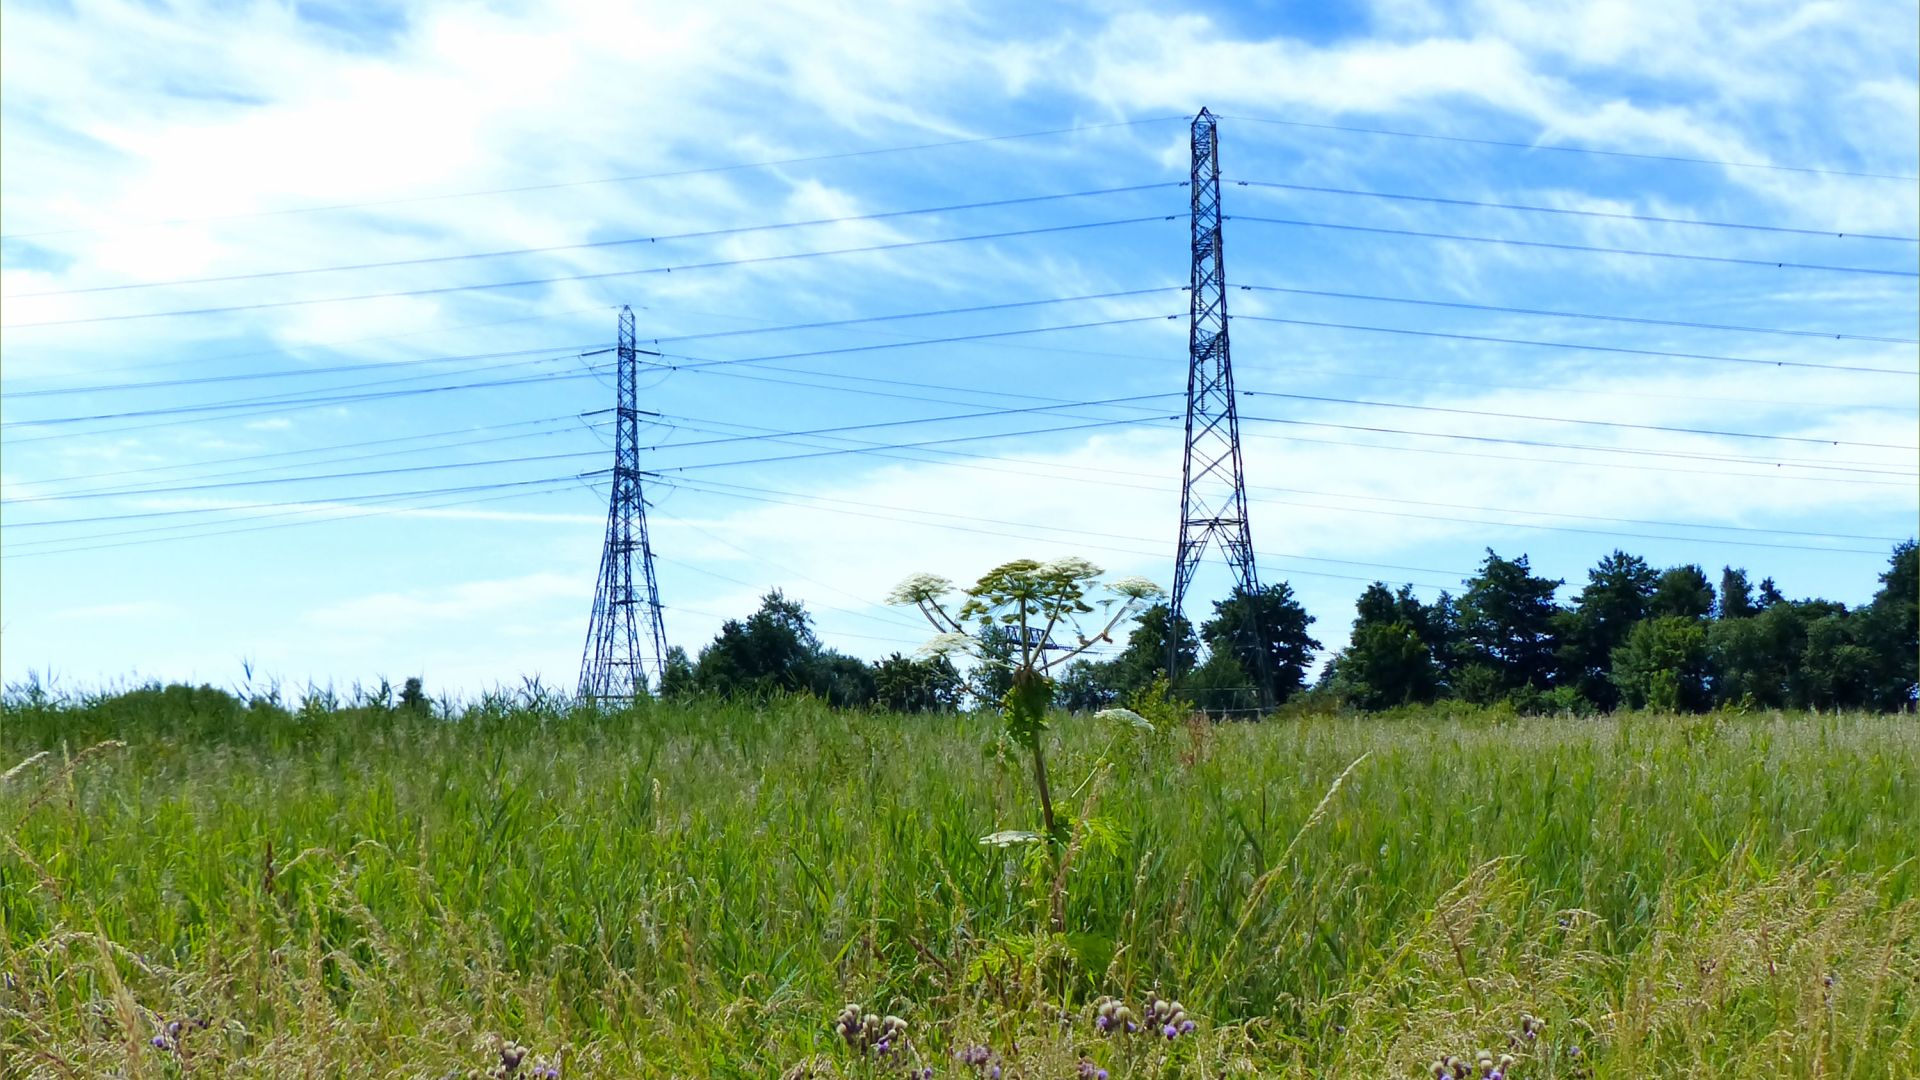 Giant Hogweed with white flowers in damp grassland with pylons and overhead cables